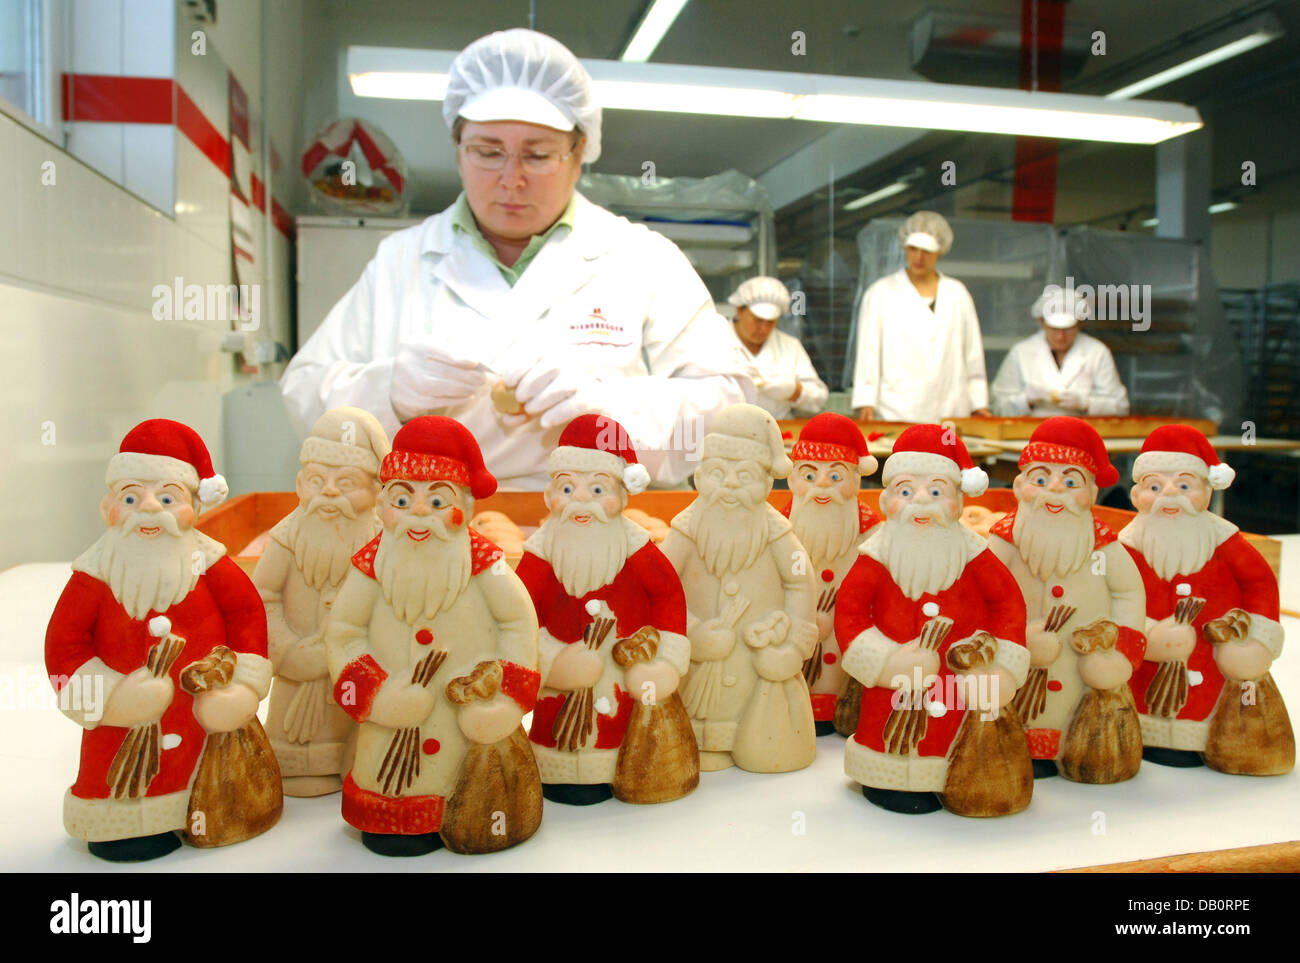 Marzipan santas smile getting painted by an employee of Niederegger in Luebeck, Germany, 14 September 2007. Founded 200 years ago by Johann Georg Niederegger produces up to 30 tons of marzipan per day, a privilege granted to pharmacists only until the 18th century. Nowadays, more than 700 employees do their job to achieve a turnover of 100 to 200 million euro per annum. Photo: Wolf Stock Photo